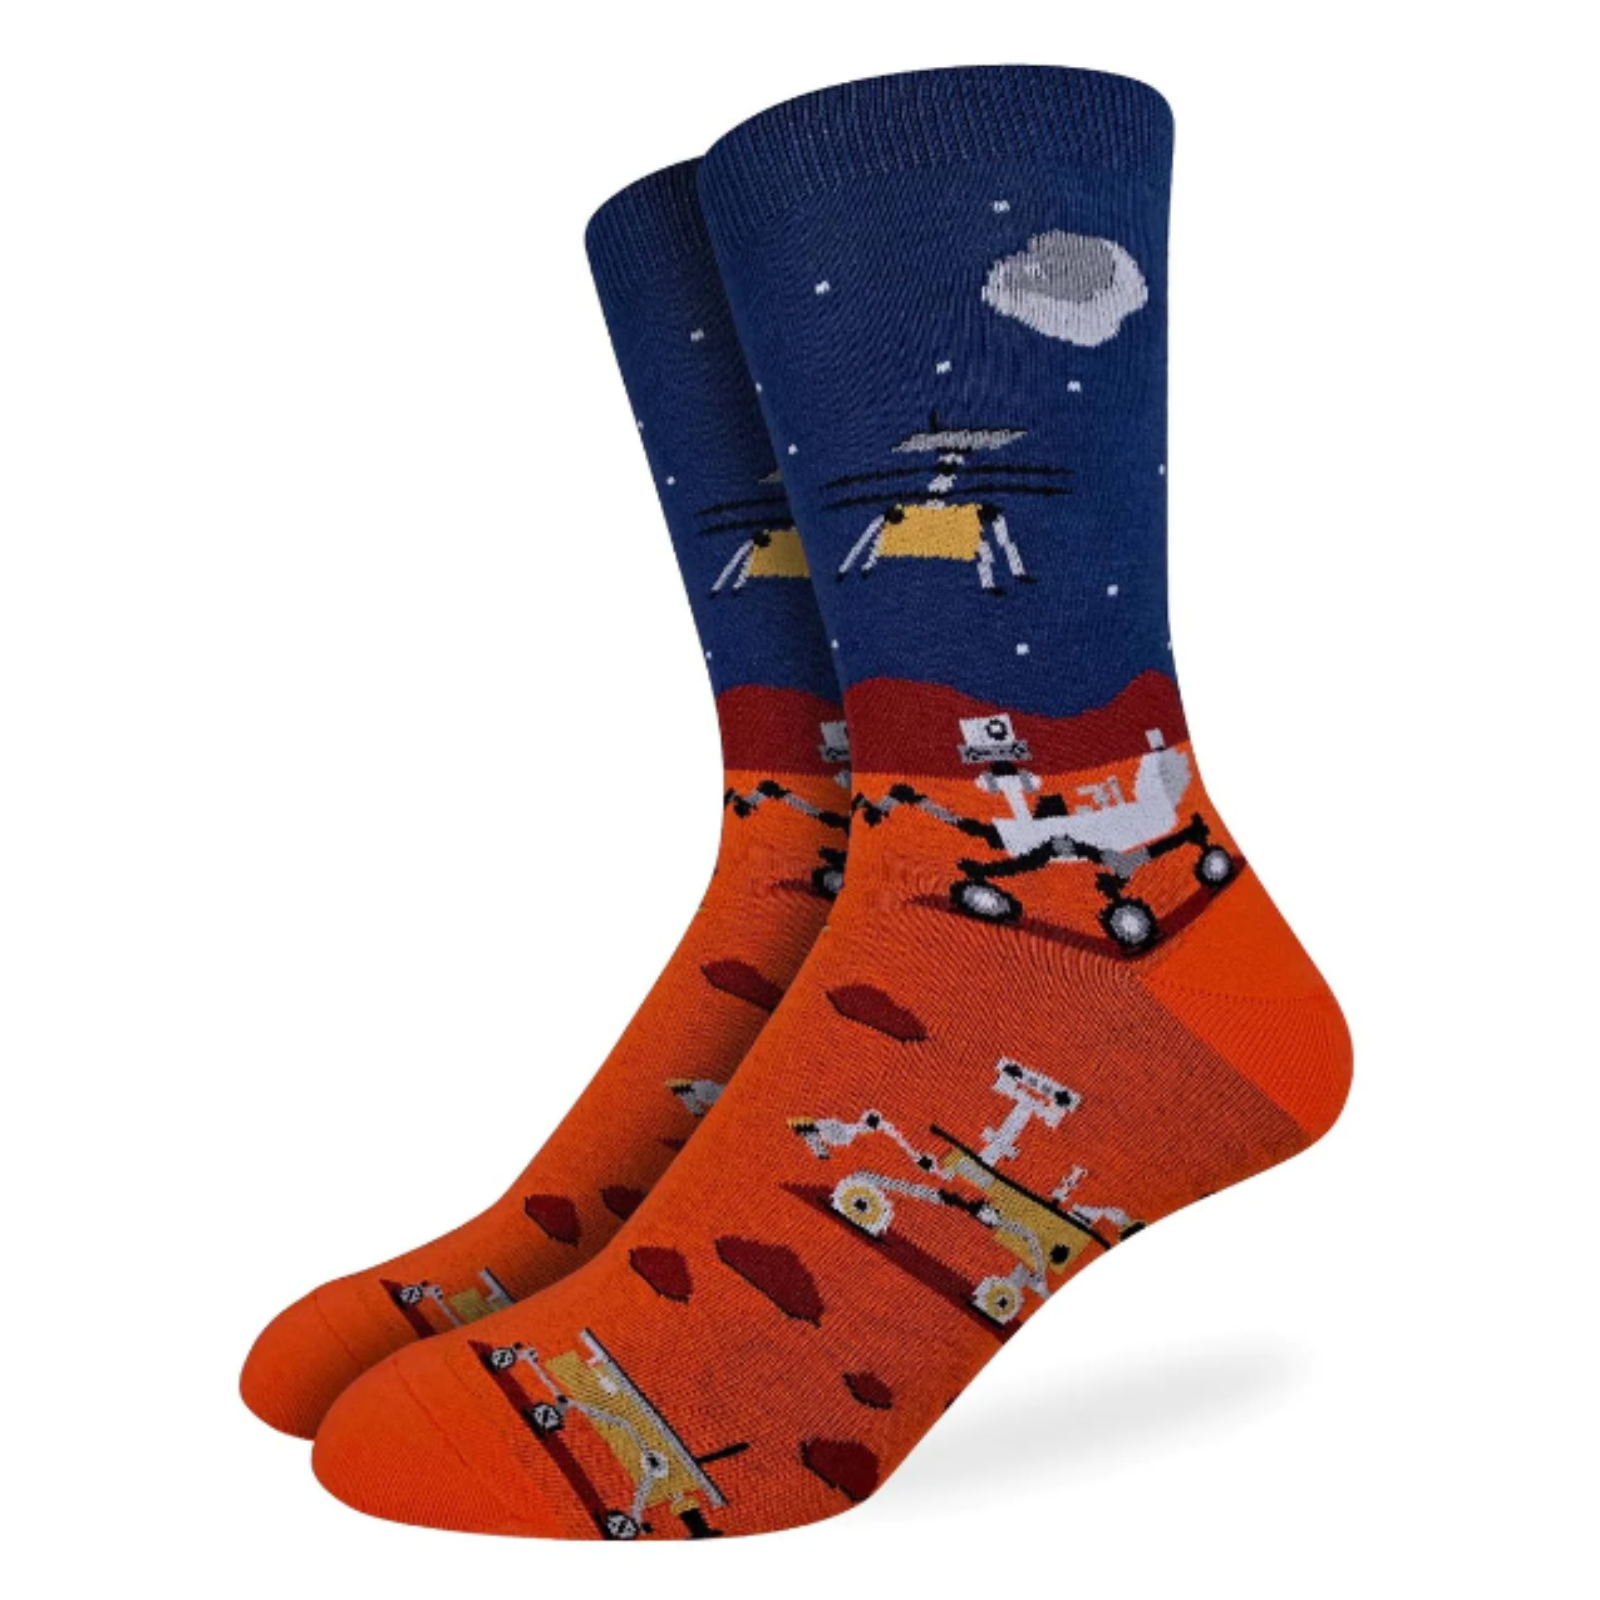 Good Luck Sock Mars Rover men's crew sock featuring blue outer space and red Mars with images of Oppie the NASA martian lander. Shown on display feet. 